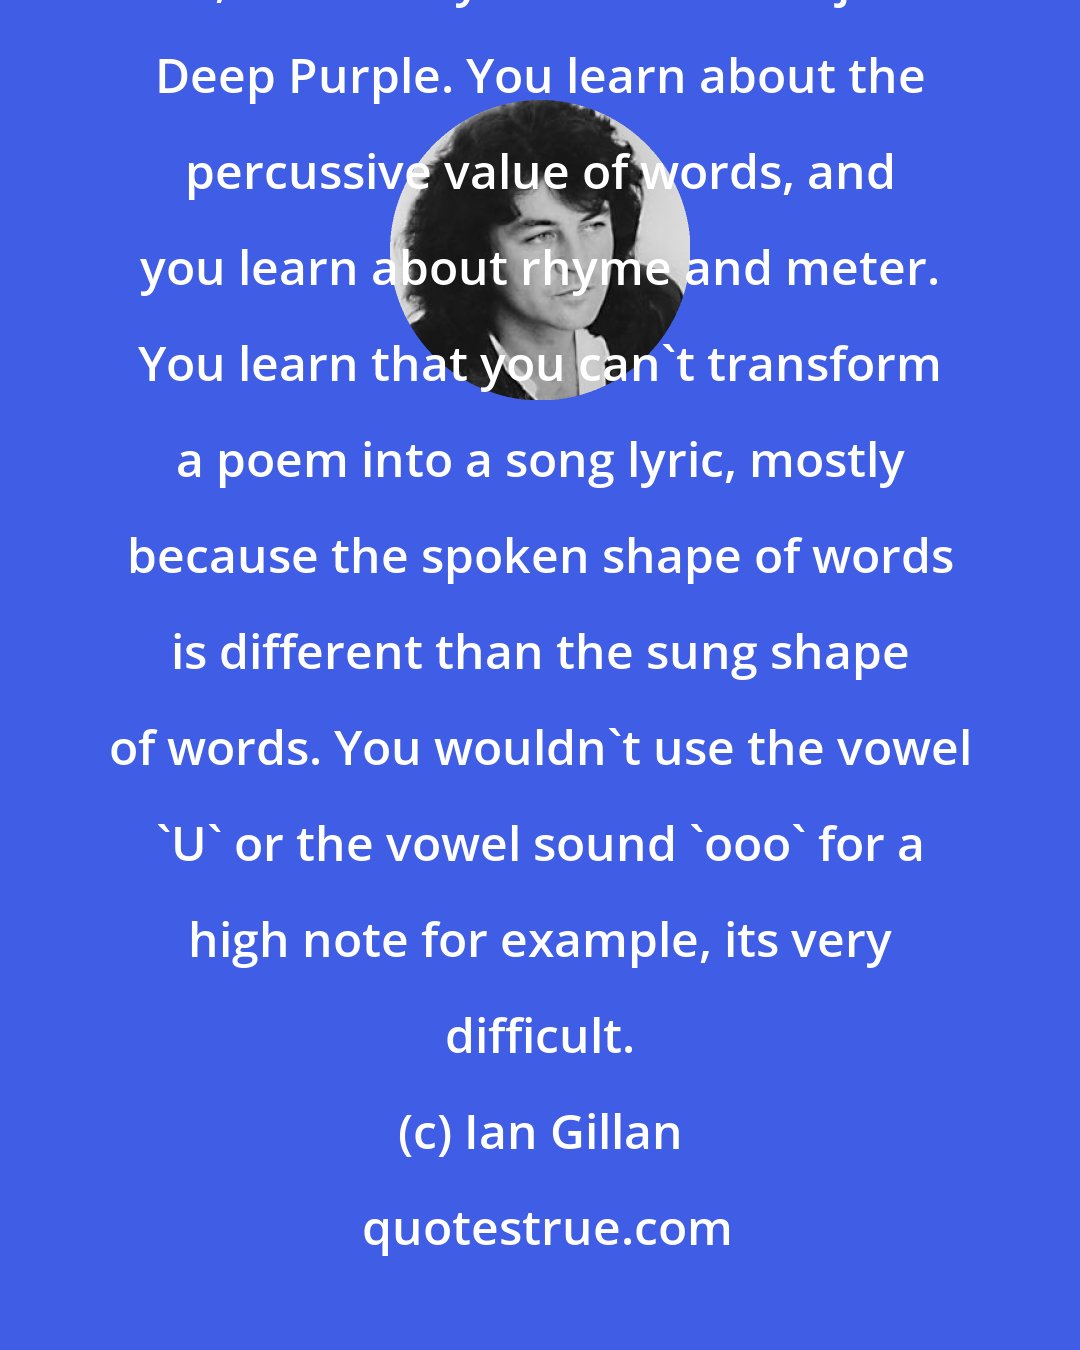 Ian Gillan: We spent a long time learning the craft of songwriting, Roger Glover and I, for a few years before we joined Deep Purple. You learn about the percussive value of words, and you learn about rhyme and meter. You learn that you can't transform a poem into a song lyric, mostly because the spoken shape of words is different than the sung shape of words. You wouldn't use the vowel 'U' or the vowel sound 'ooo' for a high note for example, its very difficult.